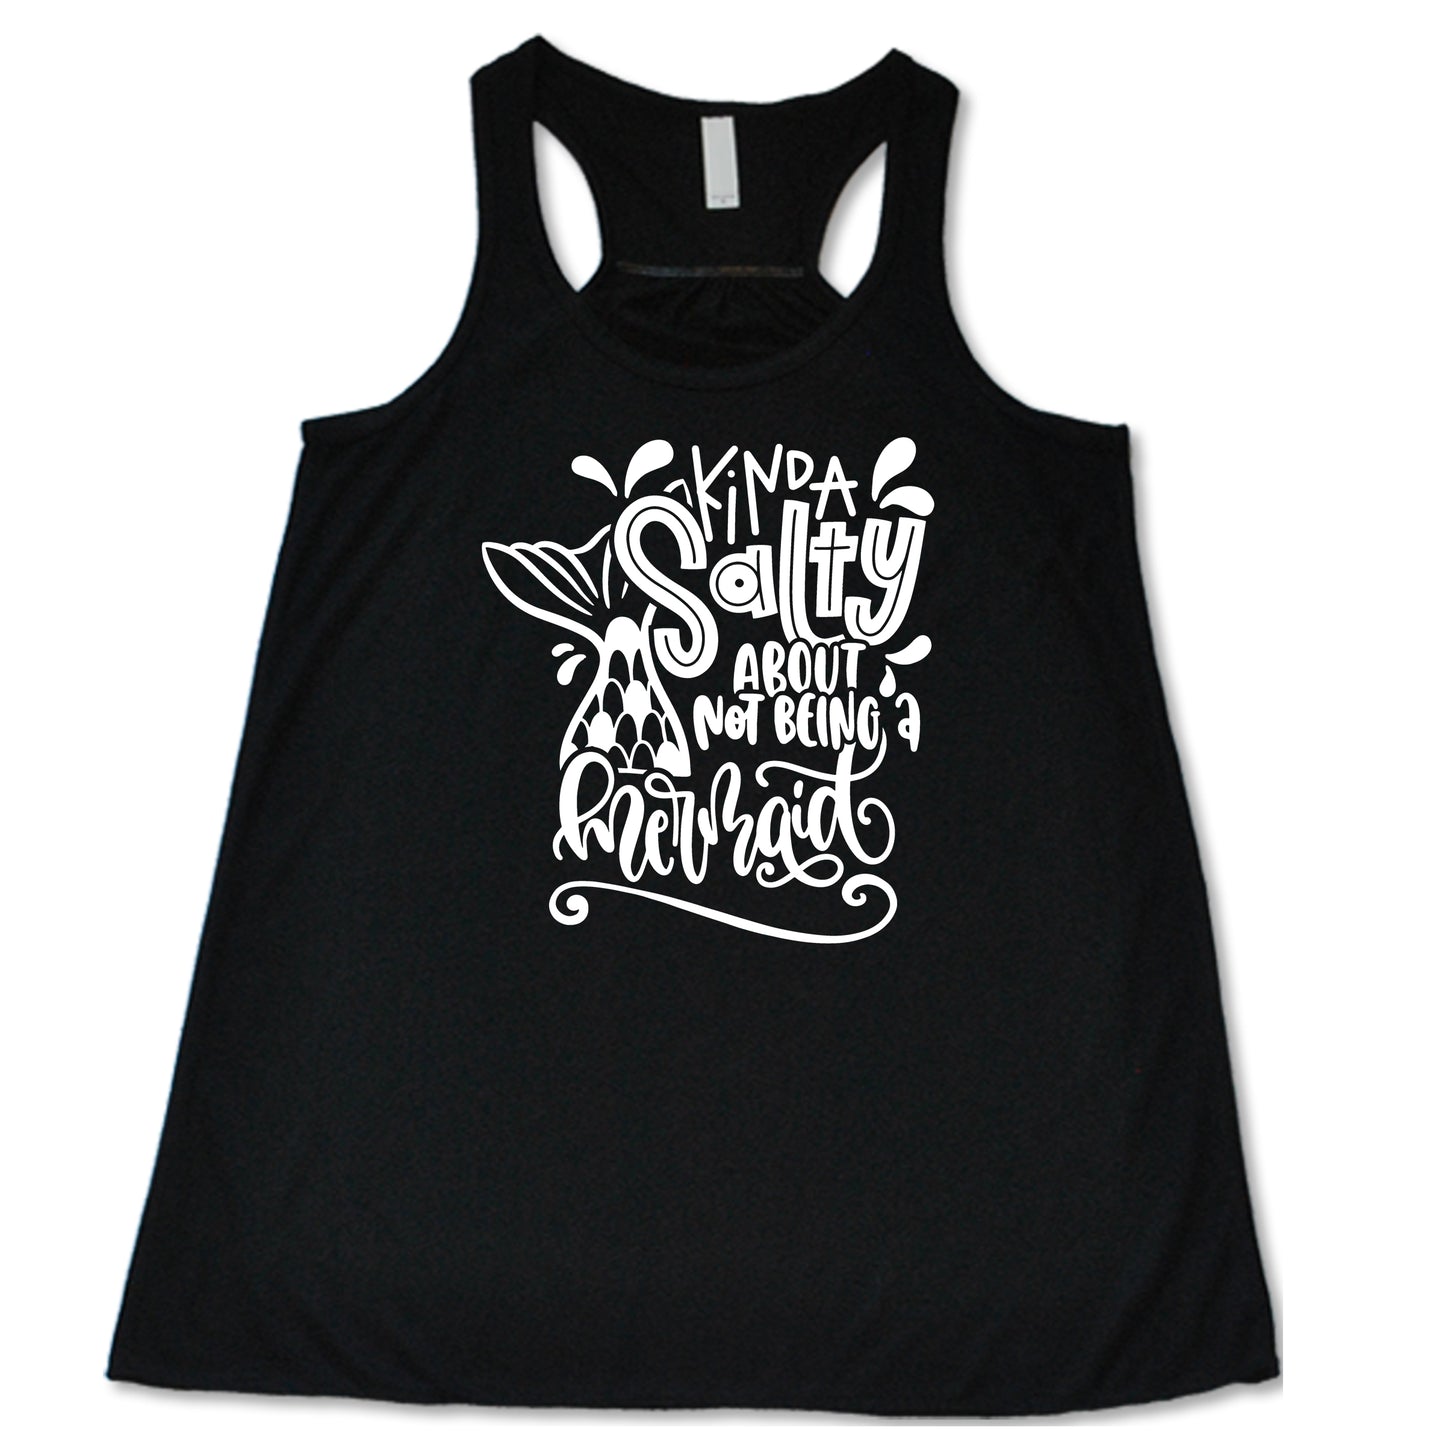 black racerback tank with the saying "kinda salty about not being a mermaid" in the center